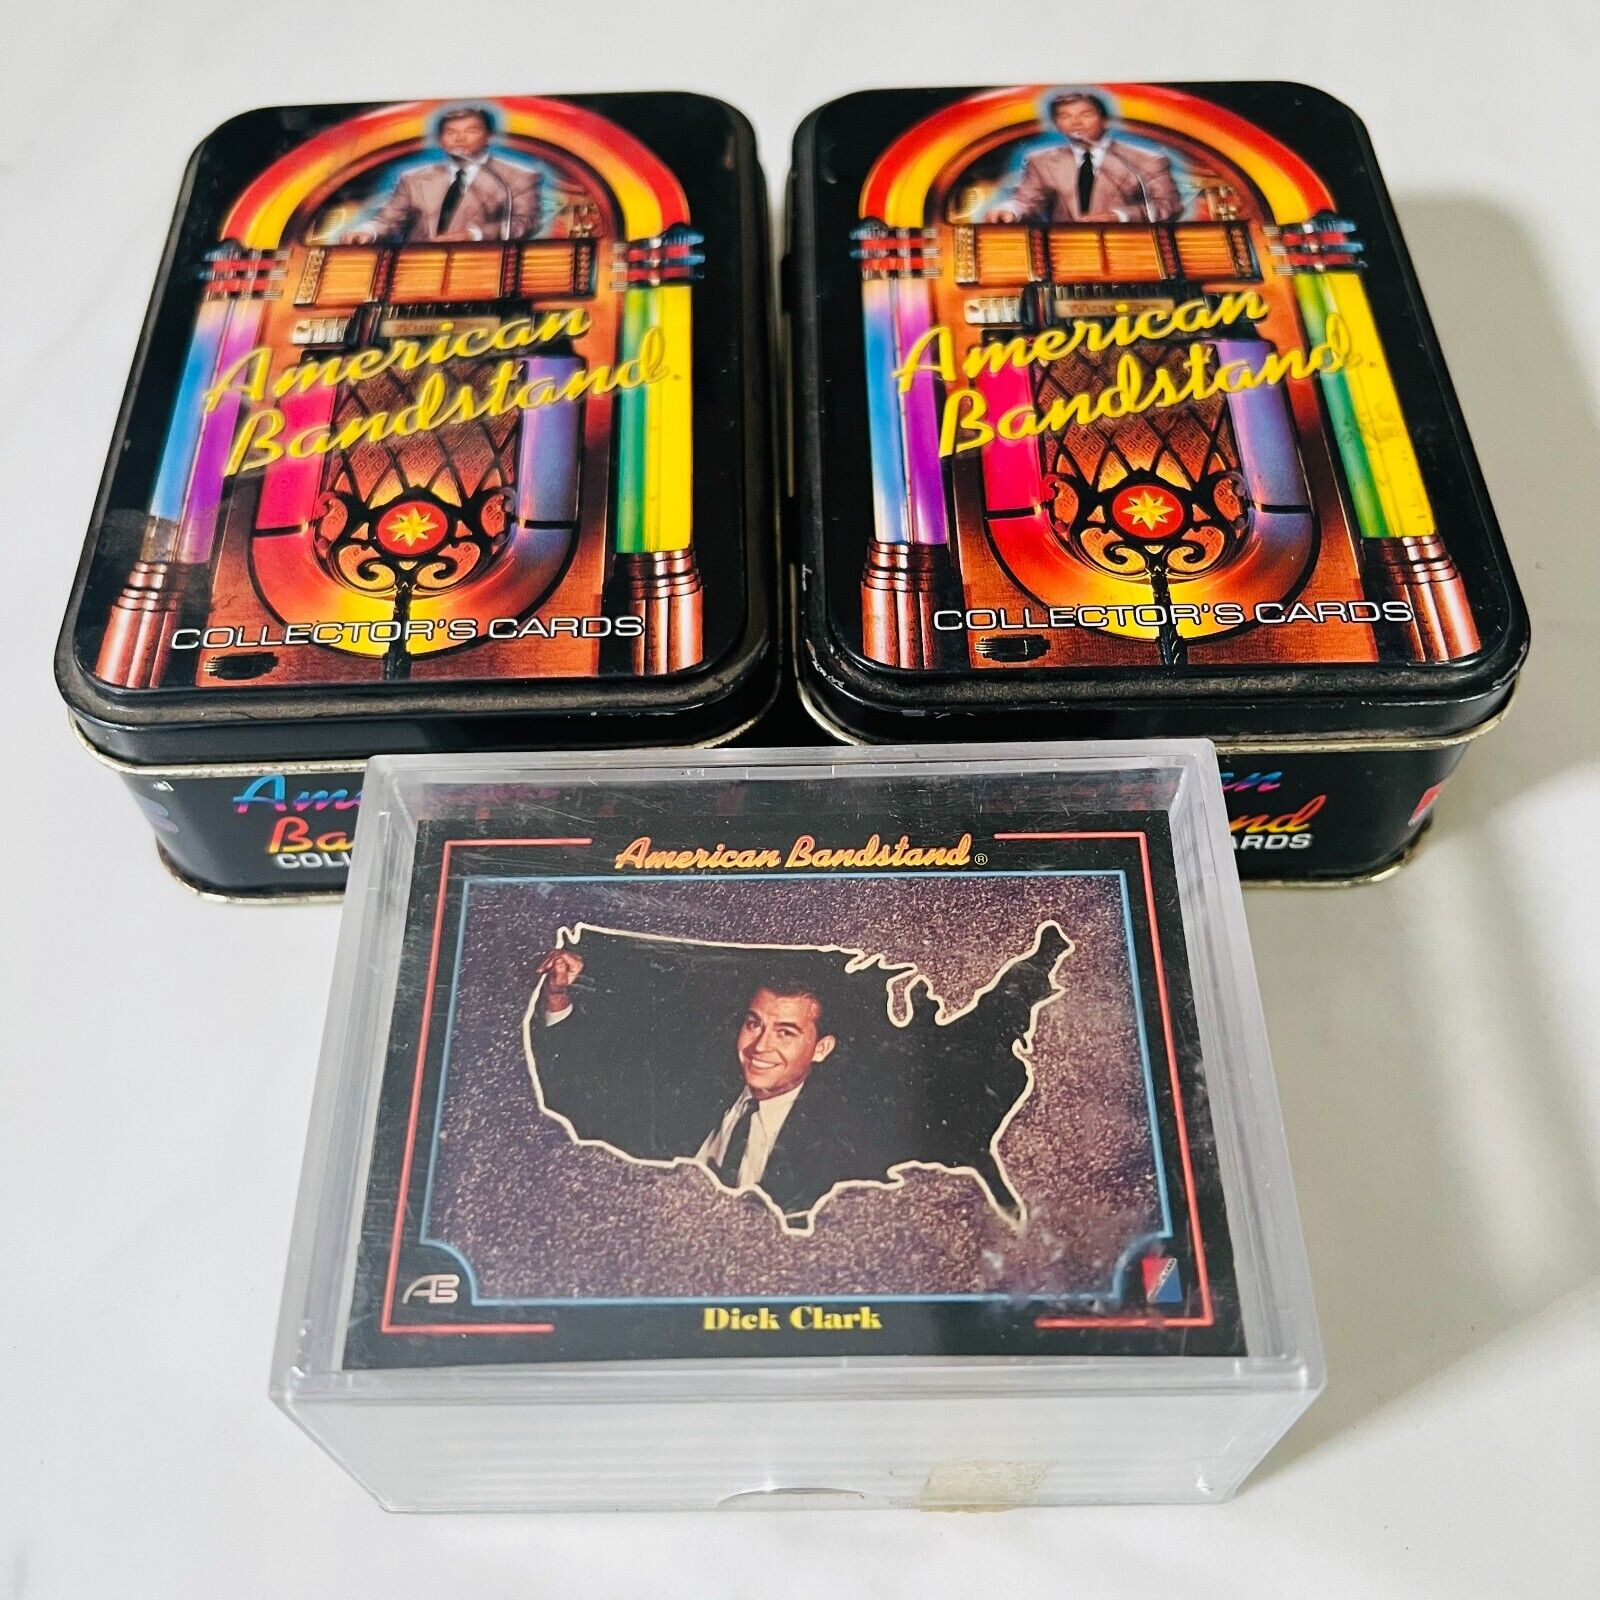 Vtg 1993 American Bandstand collector\'s cards Lot of 2 Tin with Cards + Extra